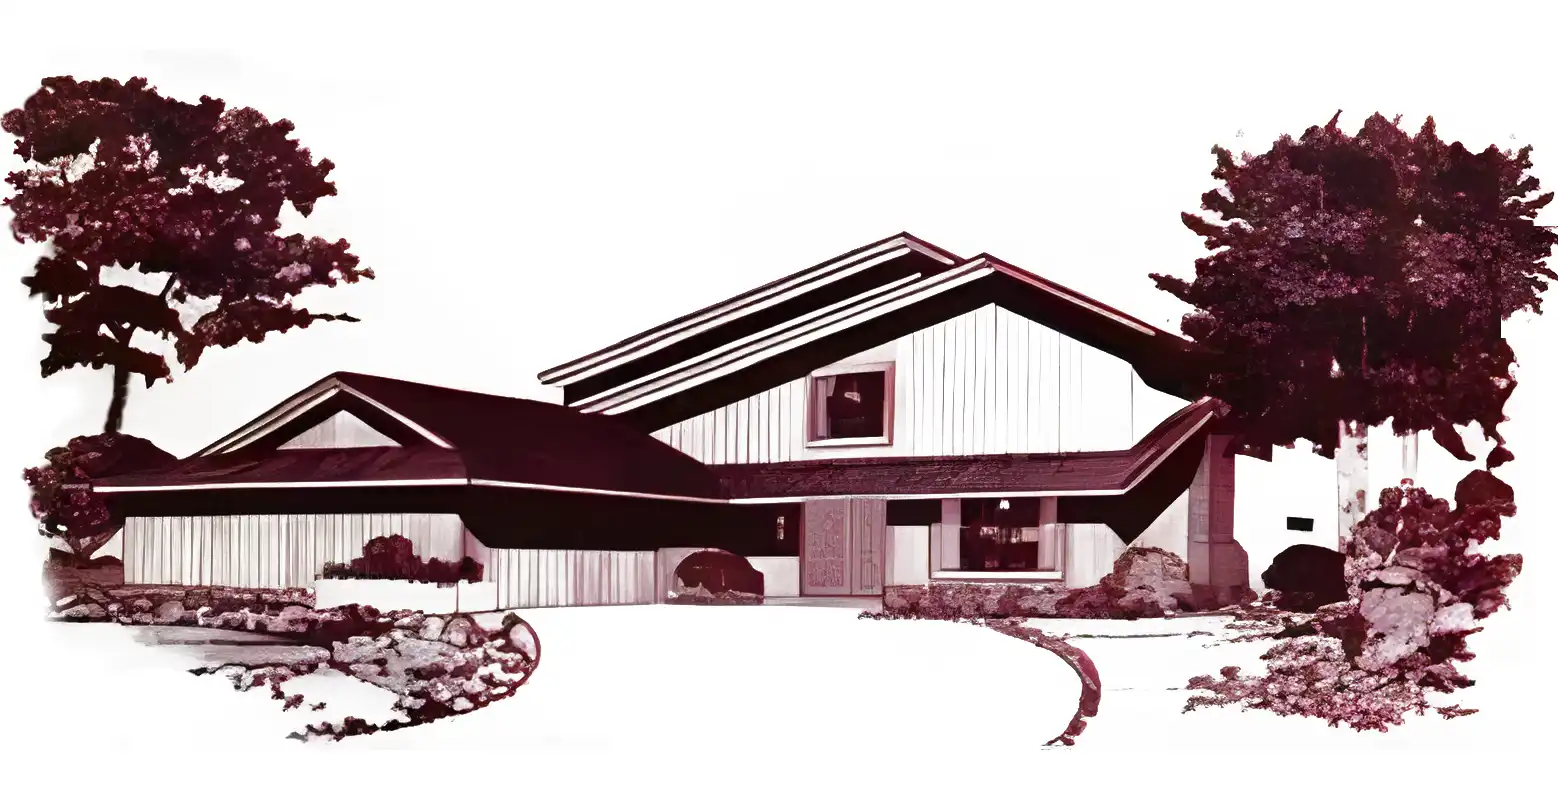 Monochrome rendering of 1960s 2 story house, variant with dutch gabled garage and 2 offset gables on house.